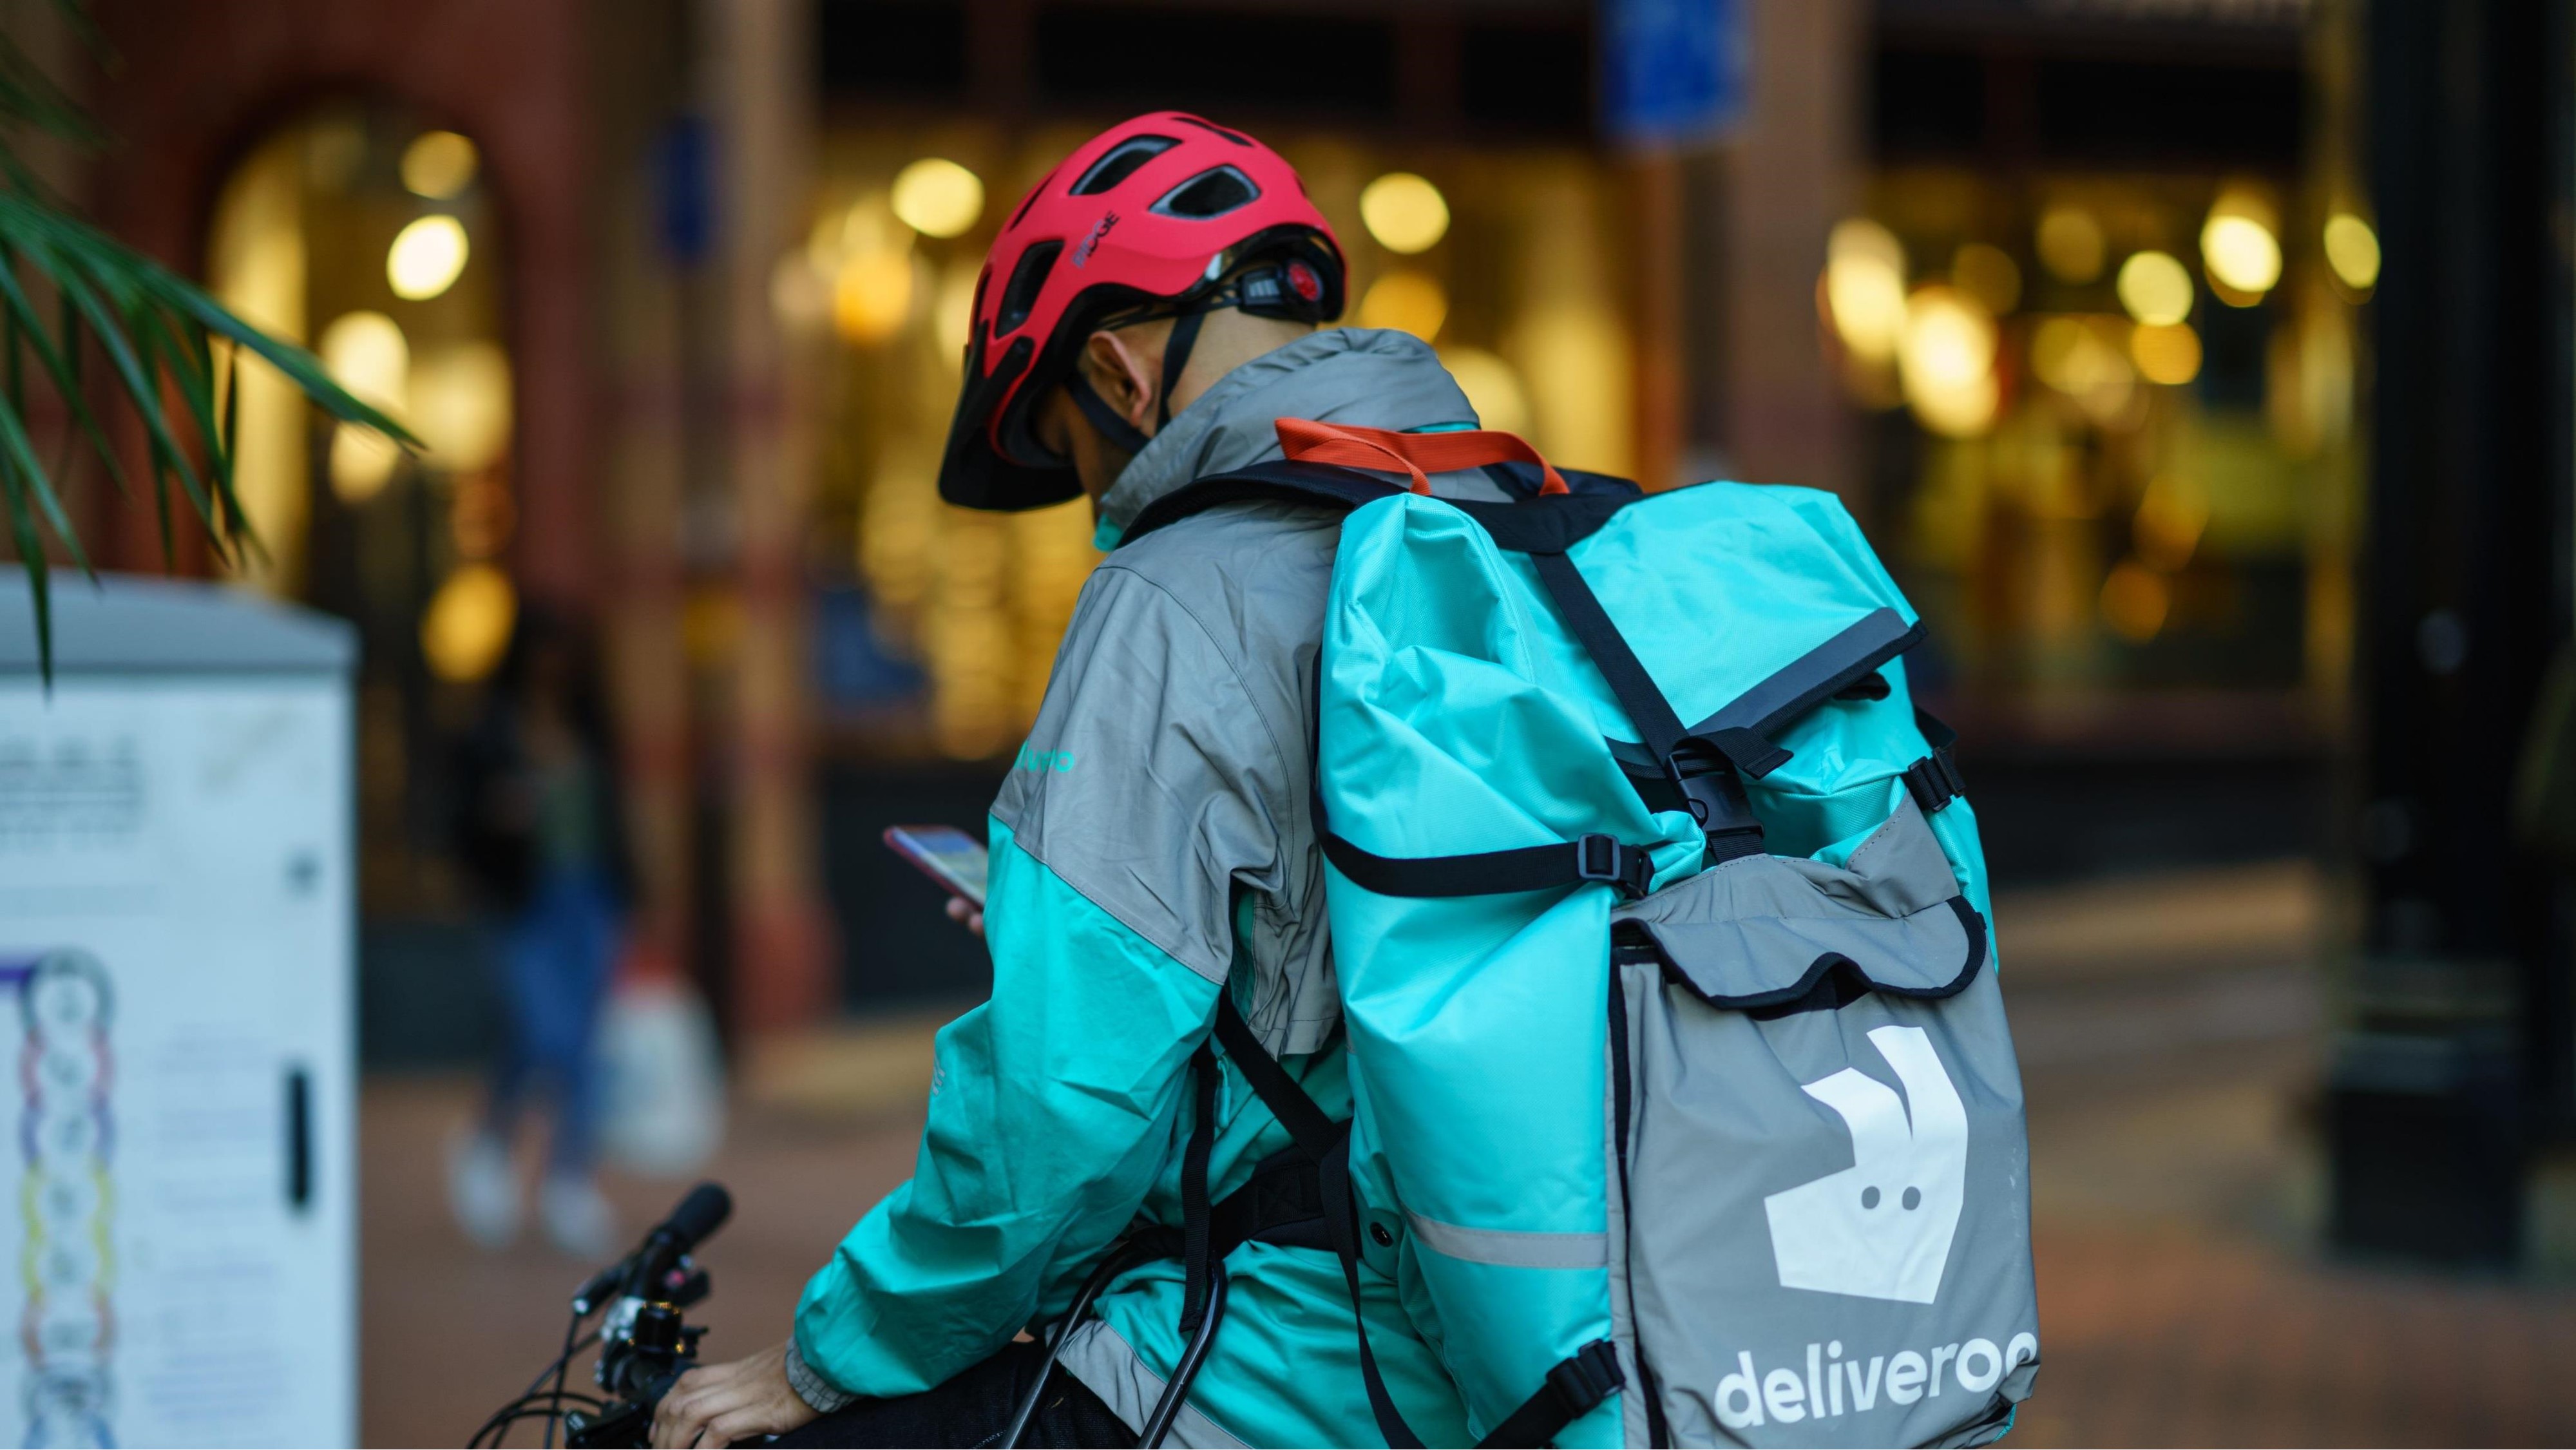 Deliveroo food delivery workers are employees